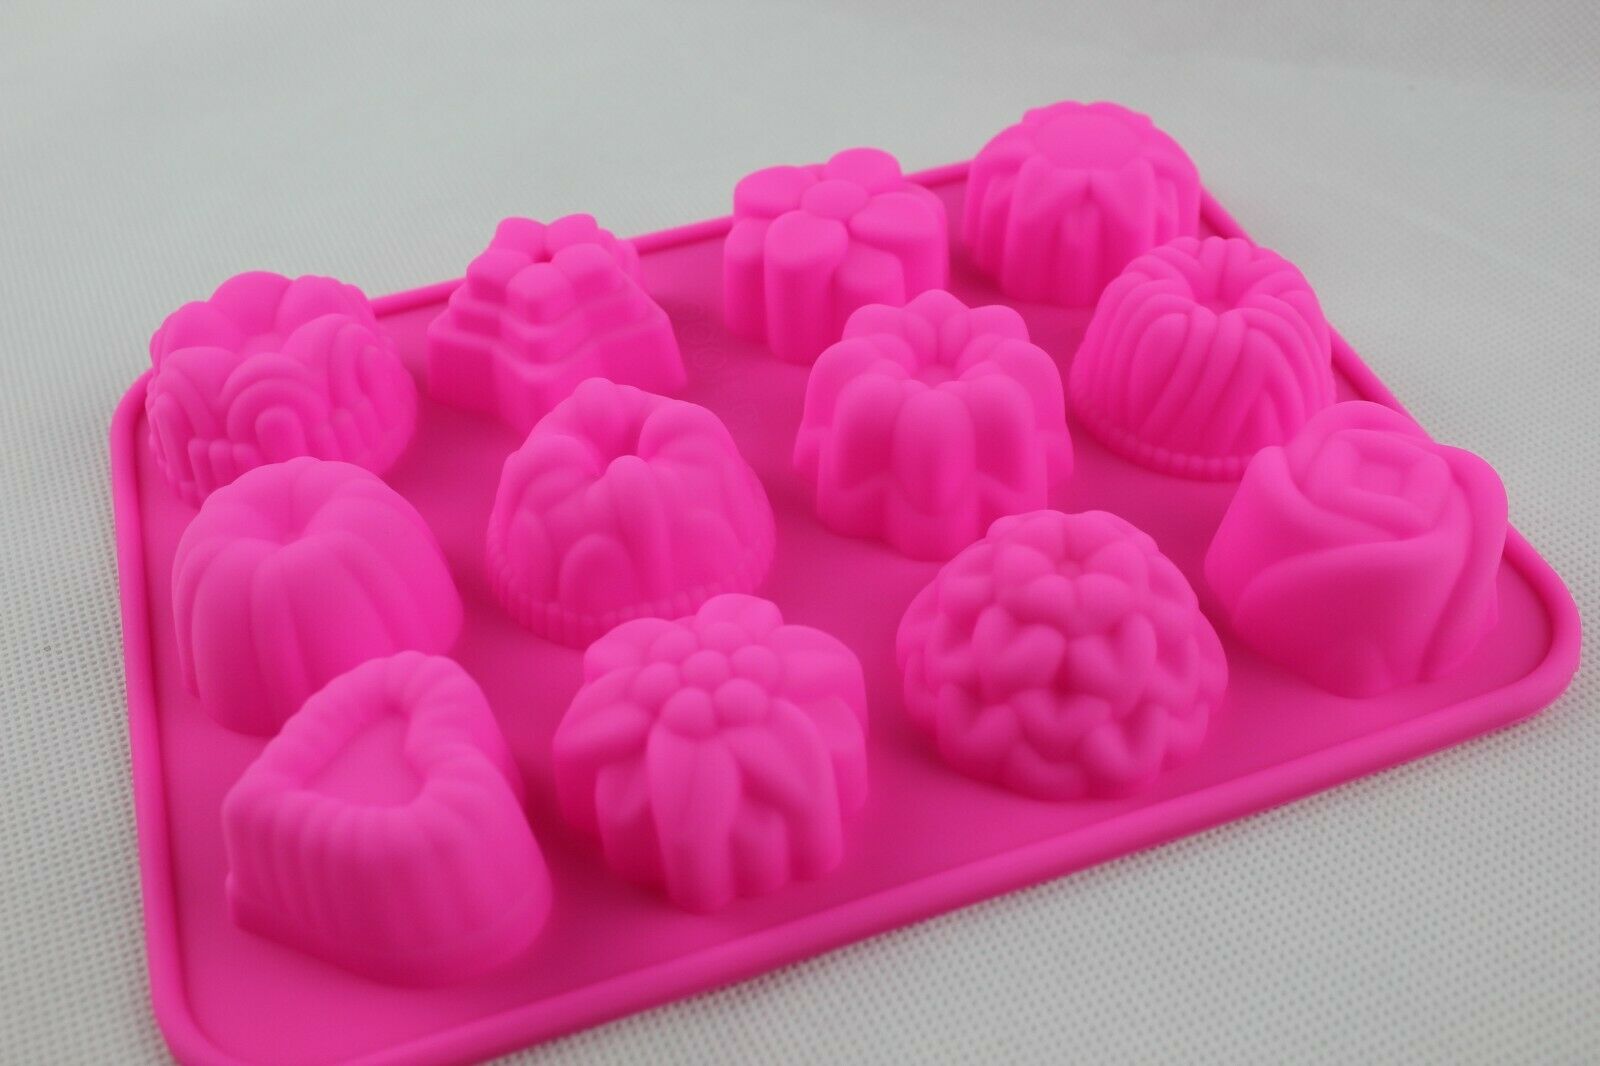 attachment-https://www.cupcakeaddicts.co.uk/wp-content/uploads/imported/3/Rose-Heart-Flower-x-12-Silicone-Cake-Chocolate-Wax-Melt-Soap-Resin-Mould-Candle-322527995583-3.jpg